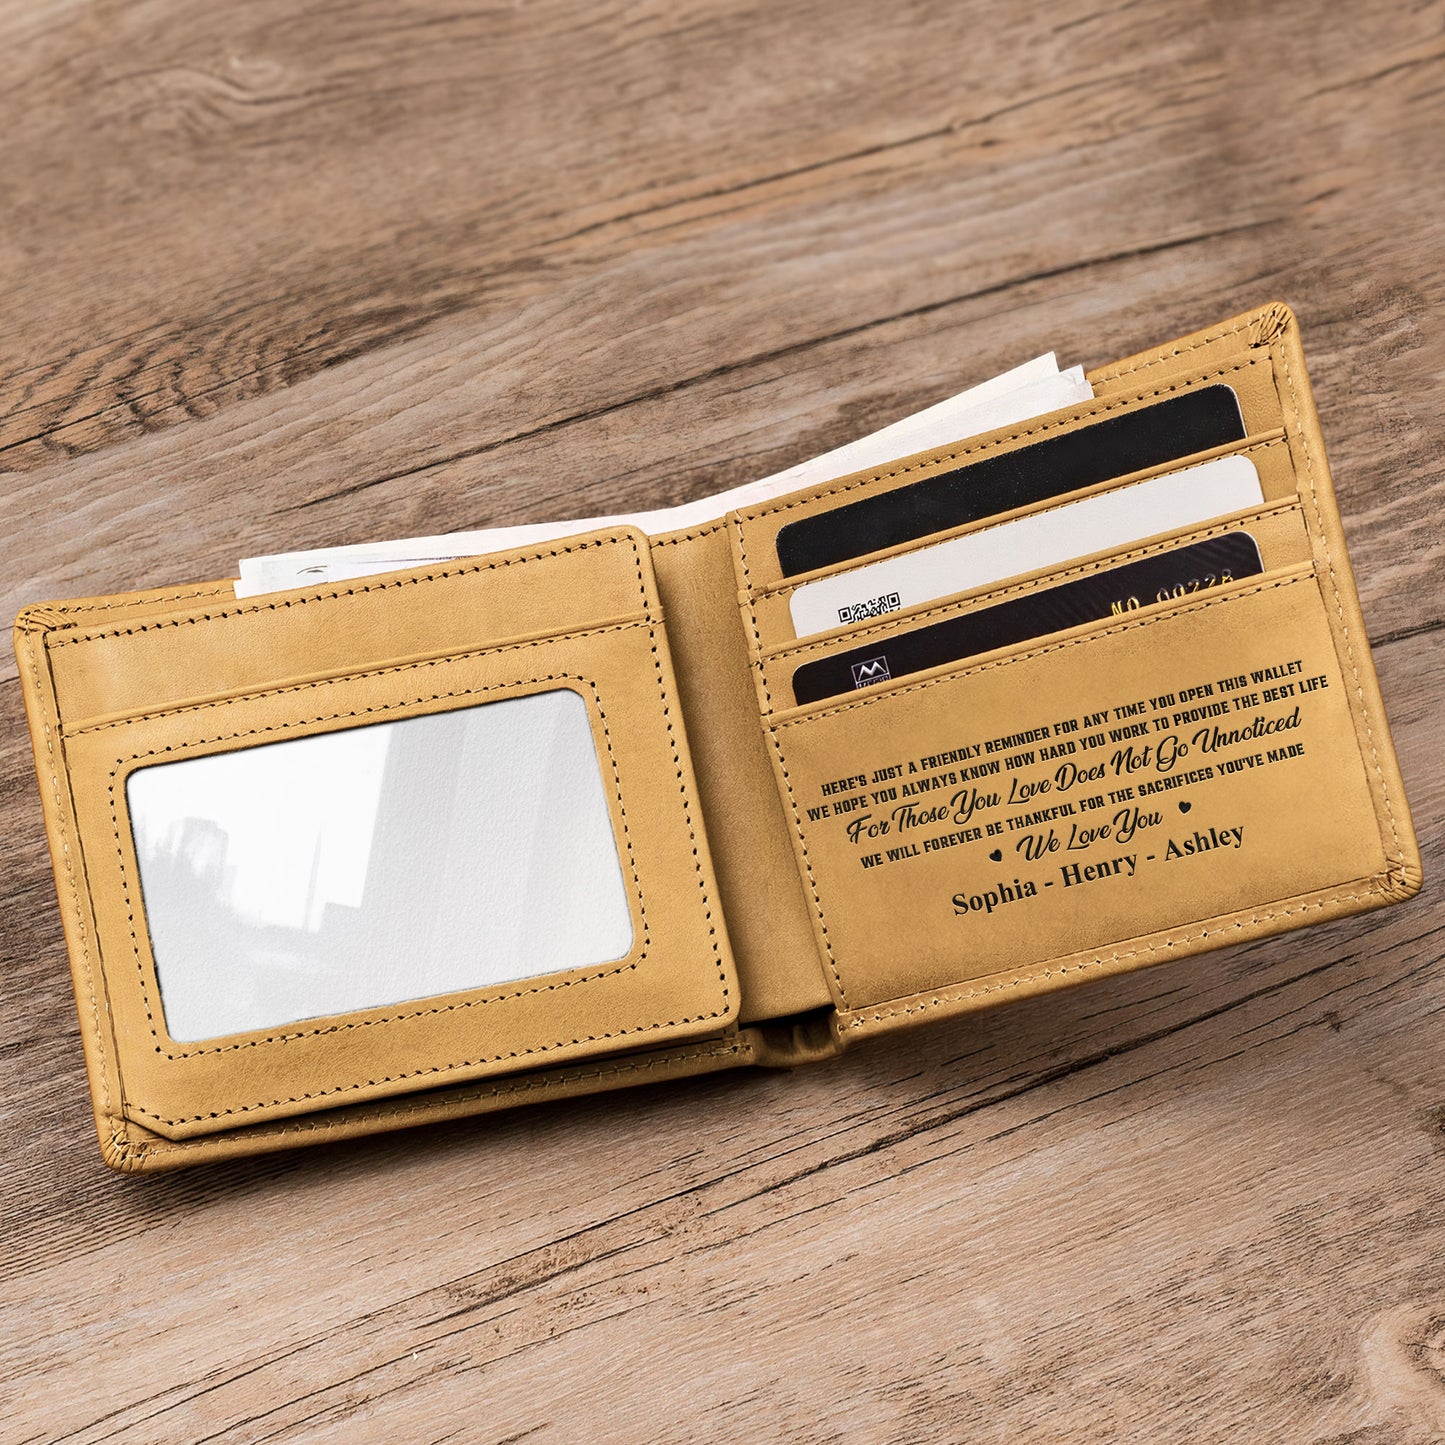 Dad - The Man The Myth The Legend - Personalized Leather Wallet